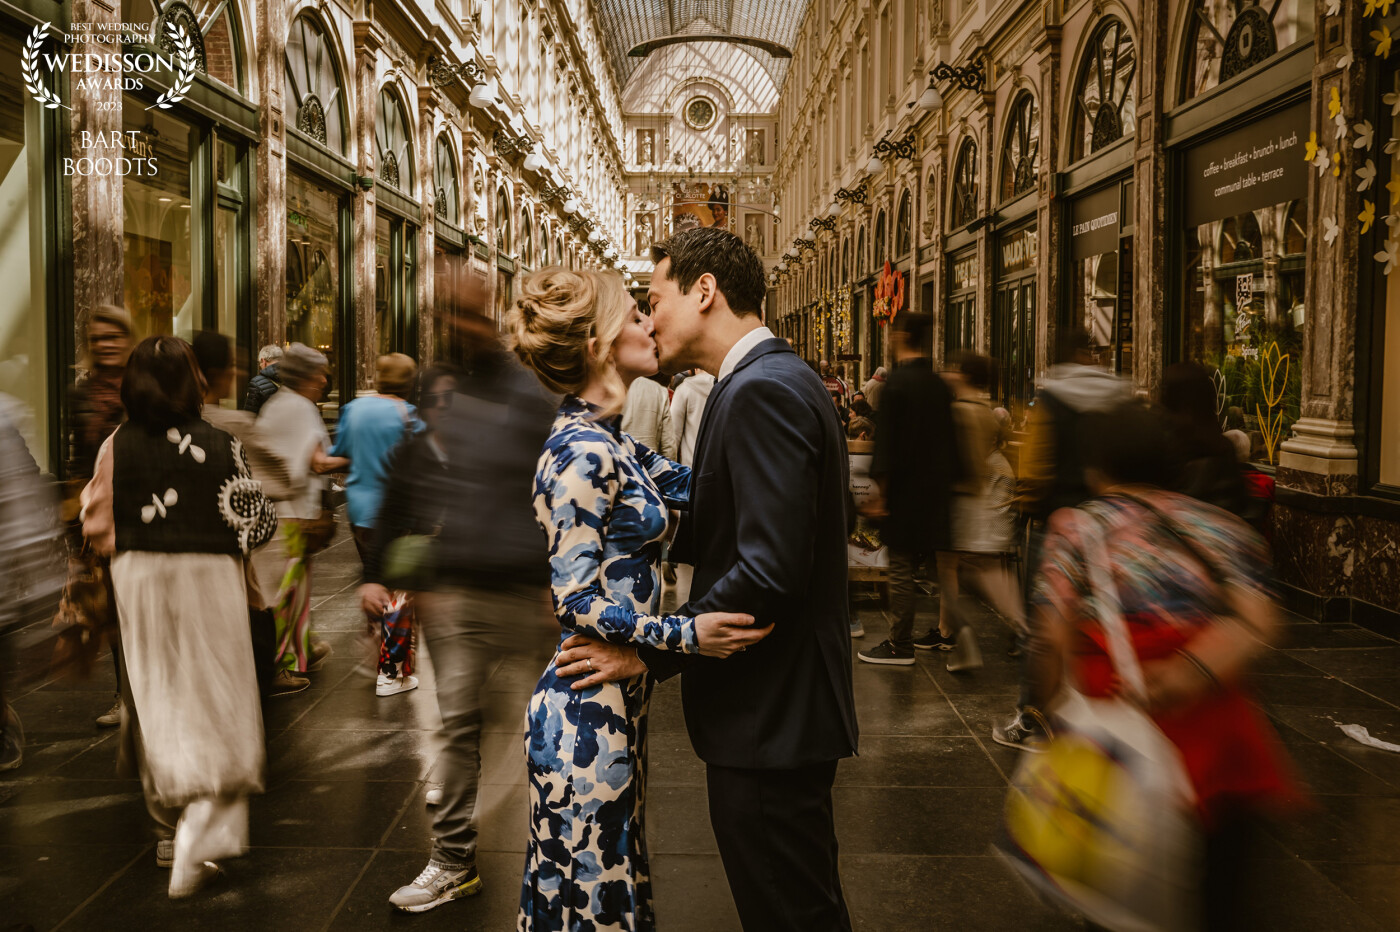 In the busy gallery in the center of the city of Brussels, this lovely wedding couple showed their love.